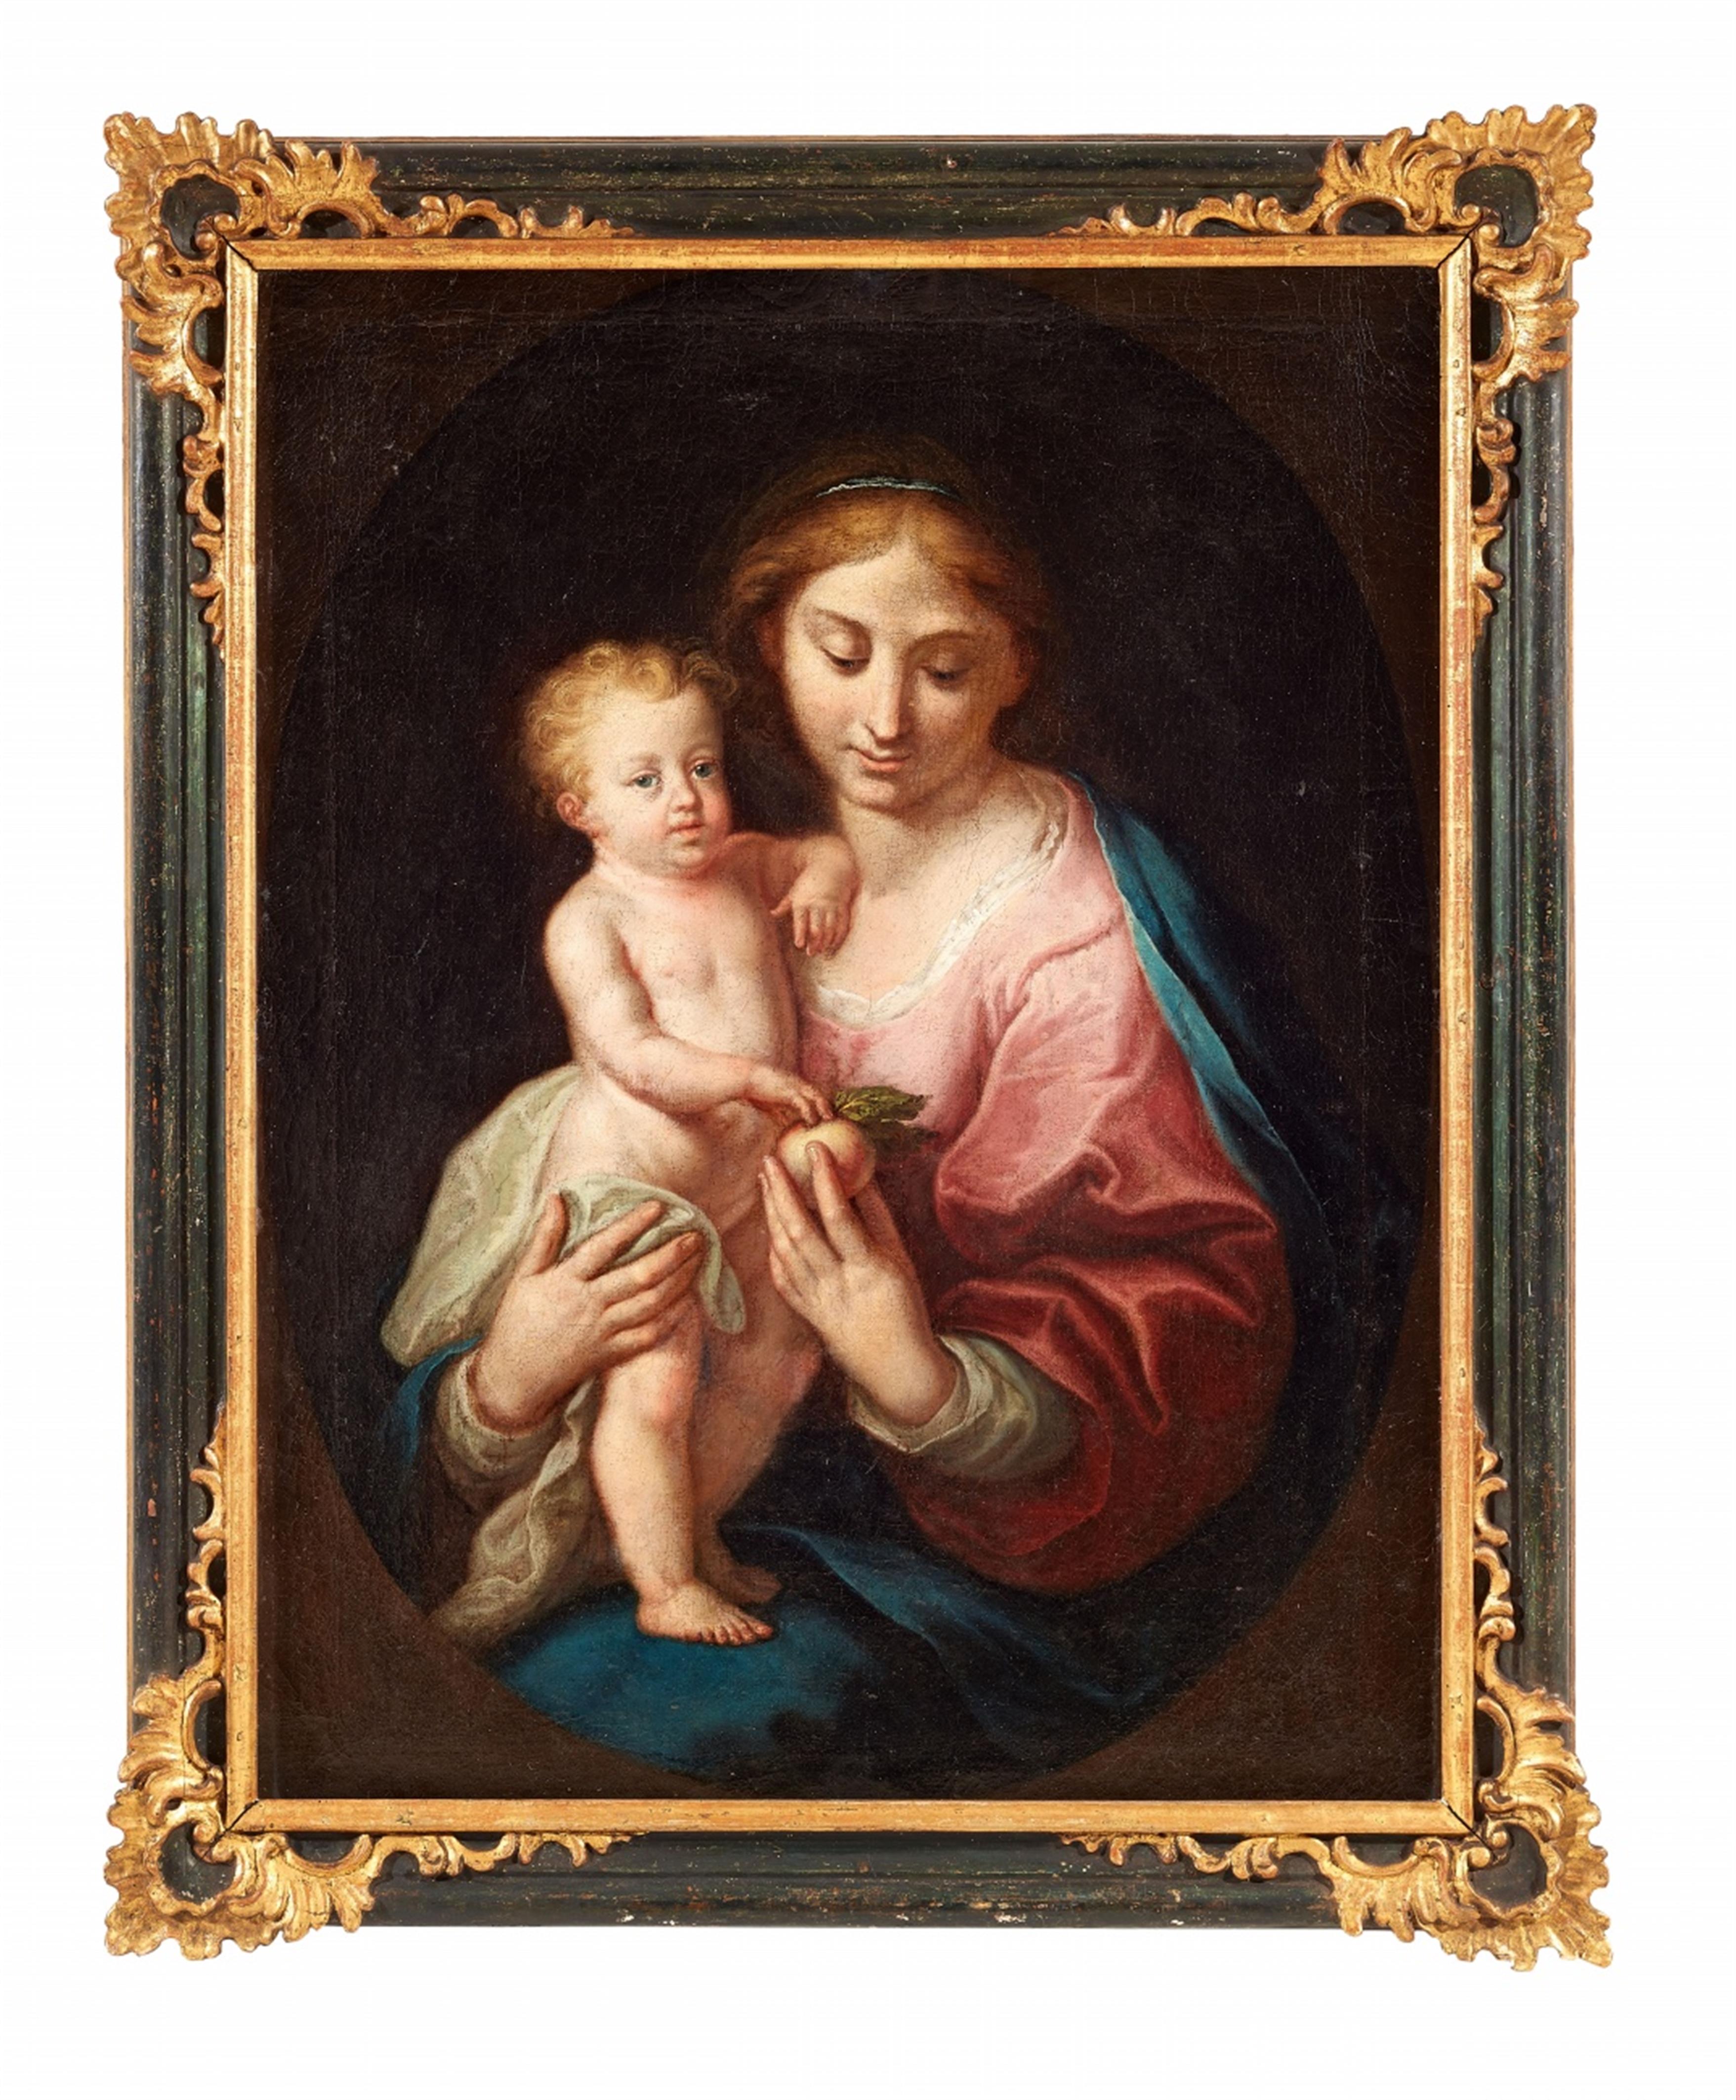 South German or Austrian School, 18th century - The Virgin and Child in a painted Oval